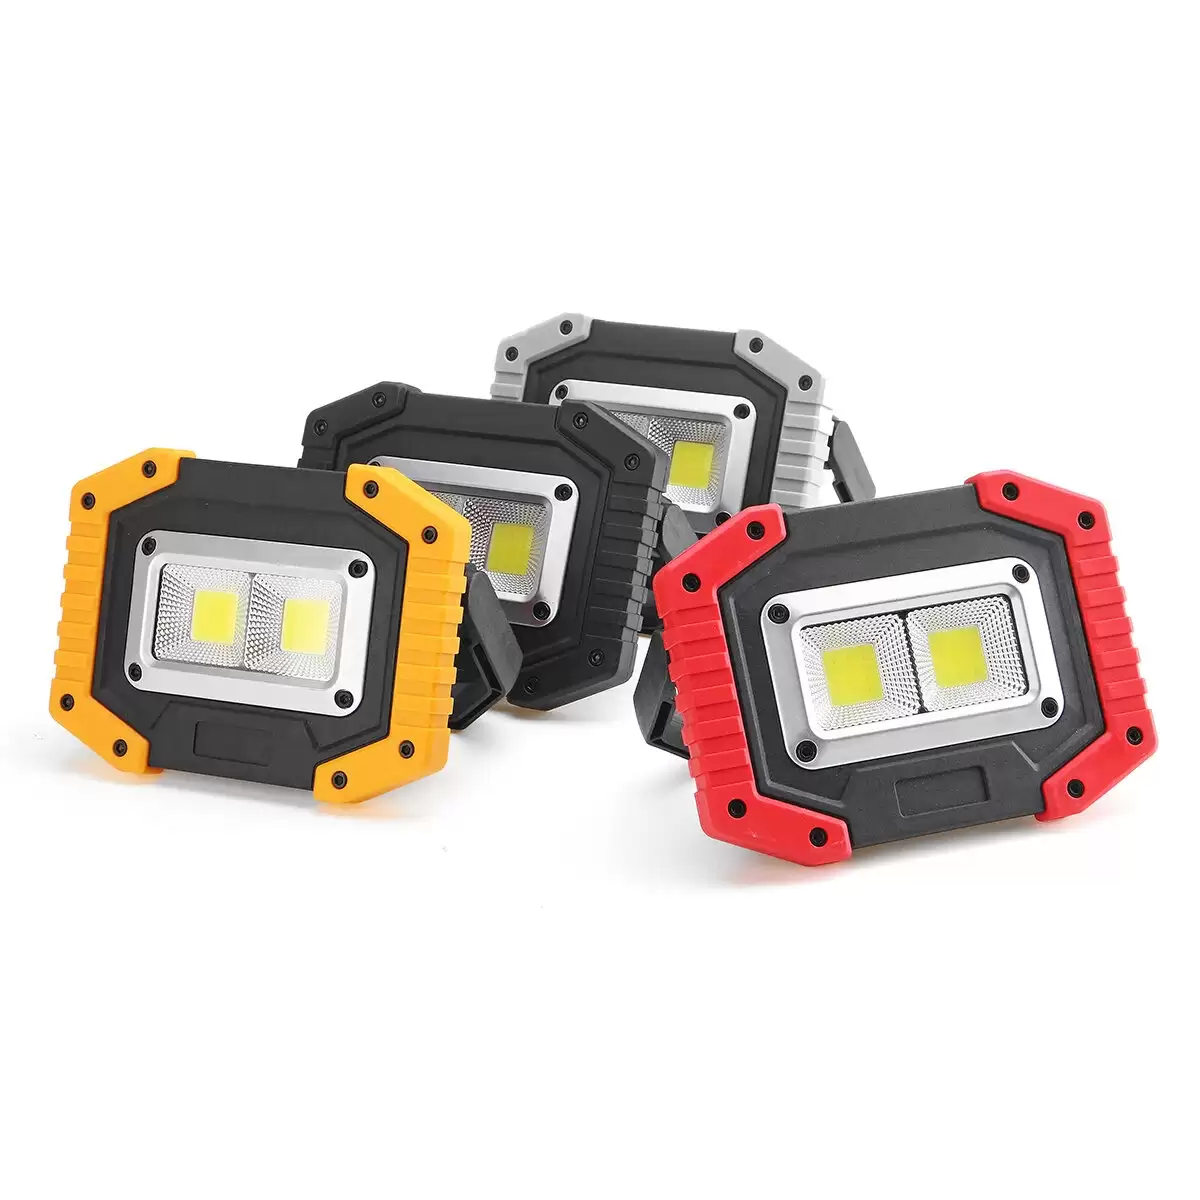 Order In Just $9.99 Xanes 24c 30w Waterproof Rechargeable Floodlight With This Coupon At Banggood